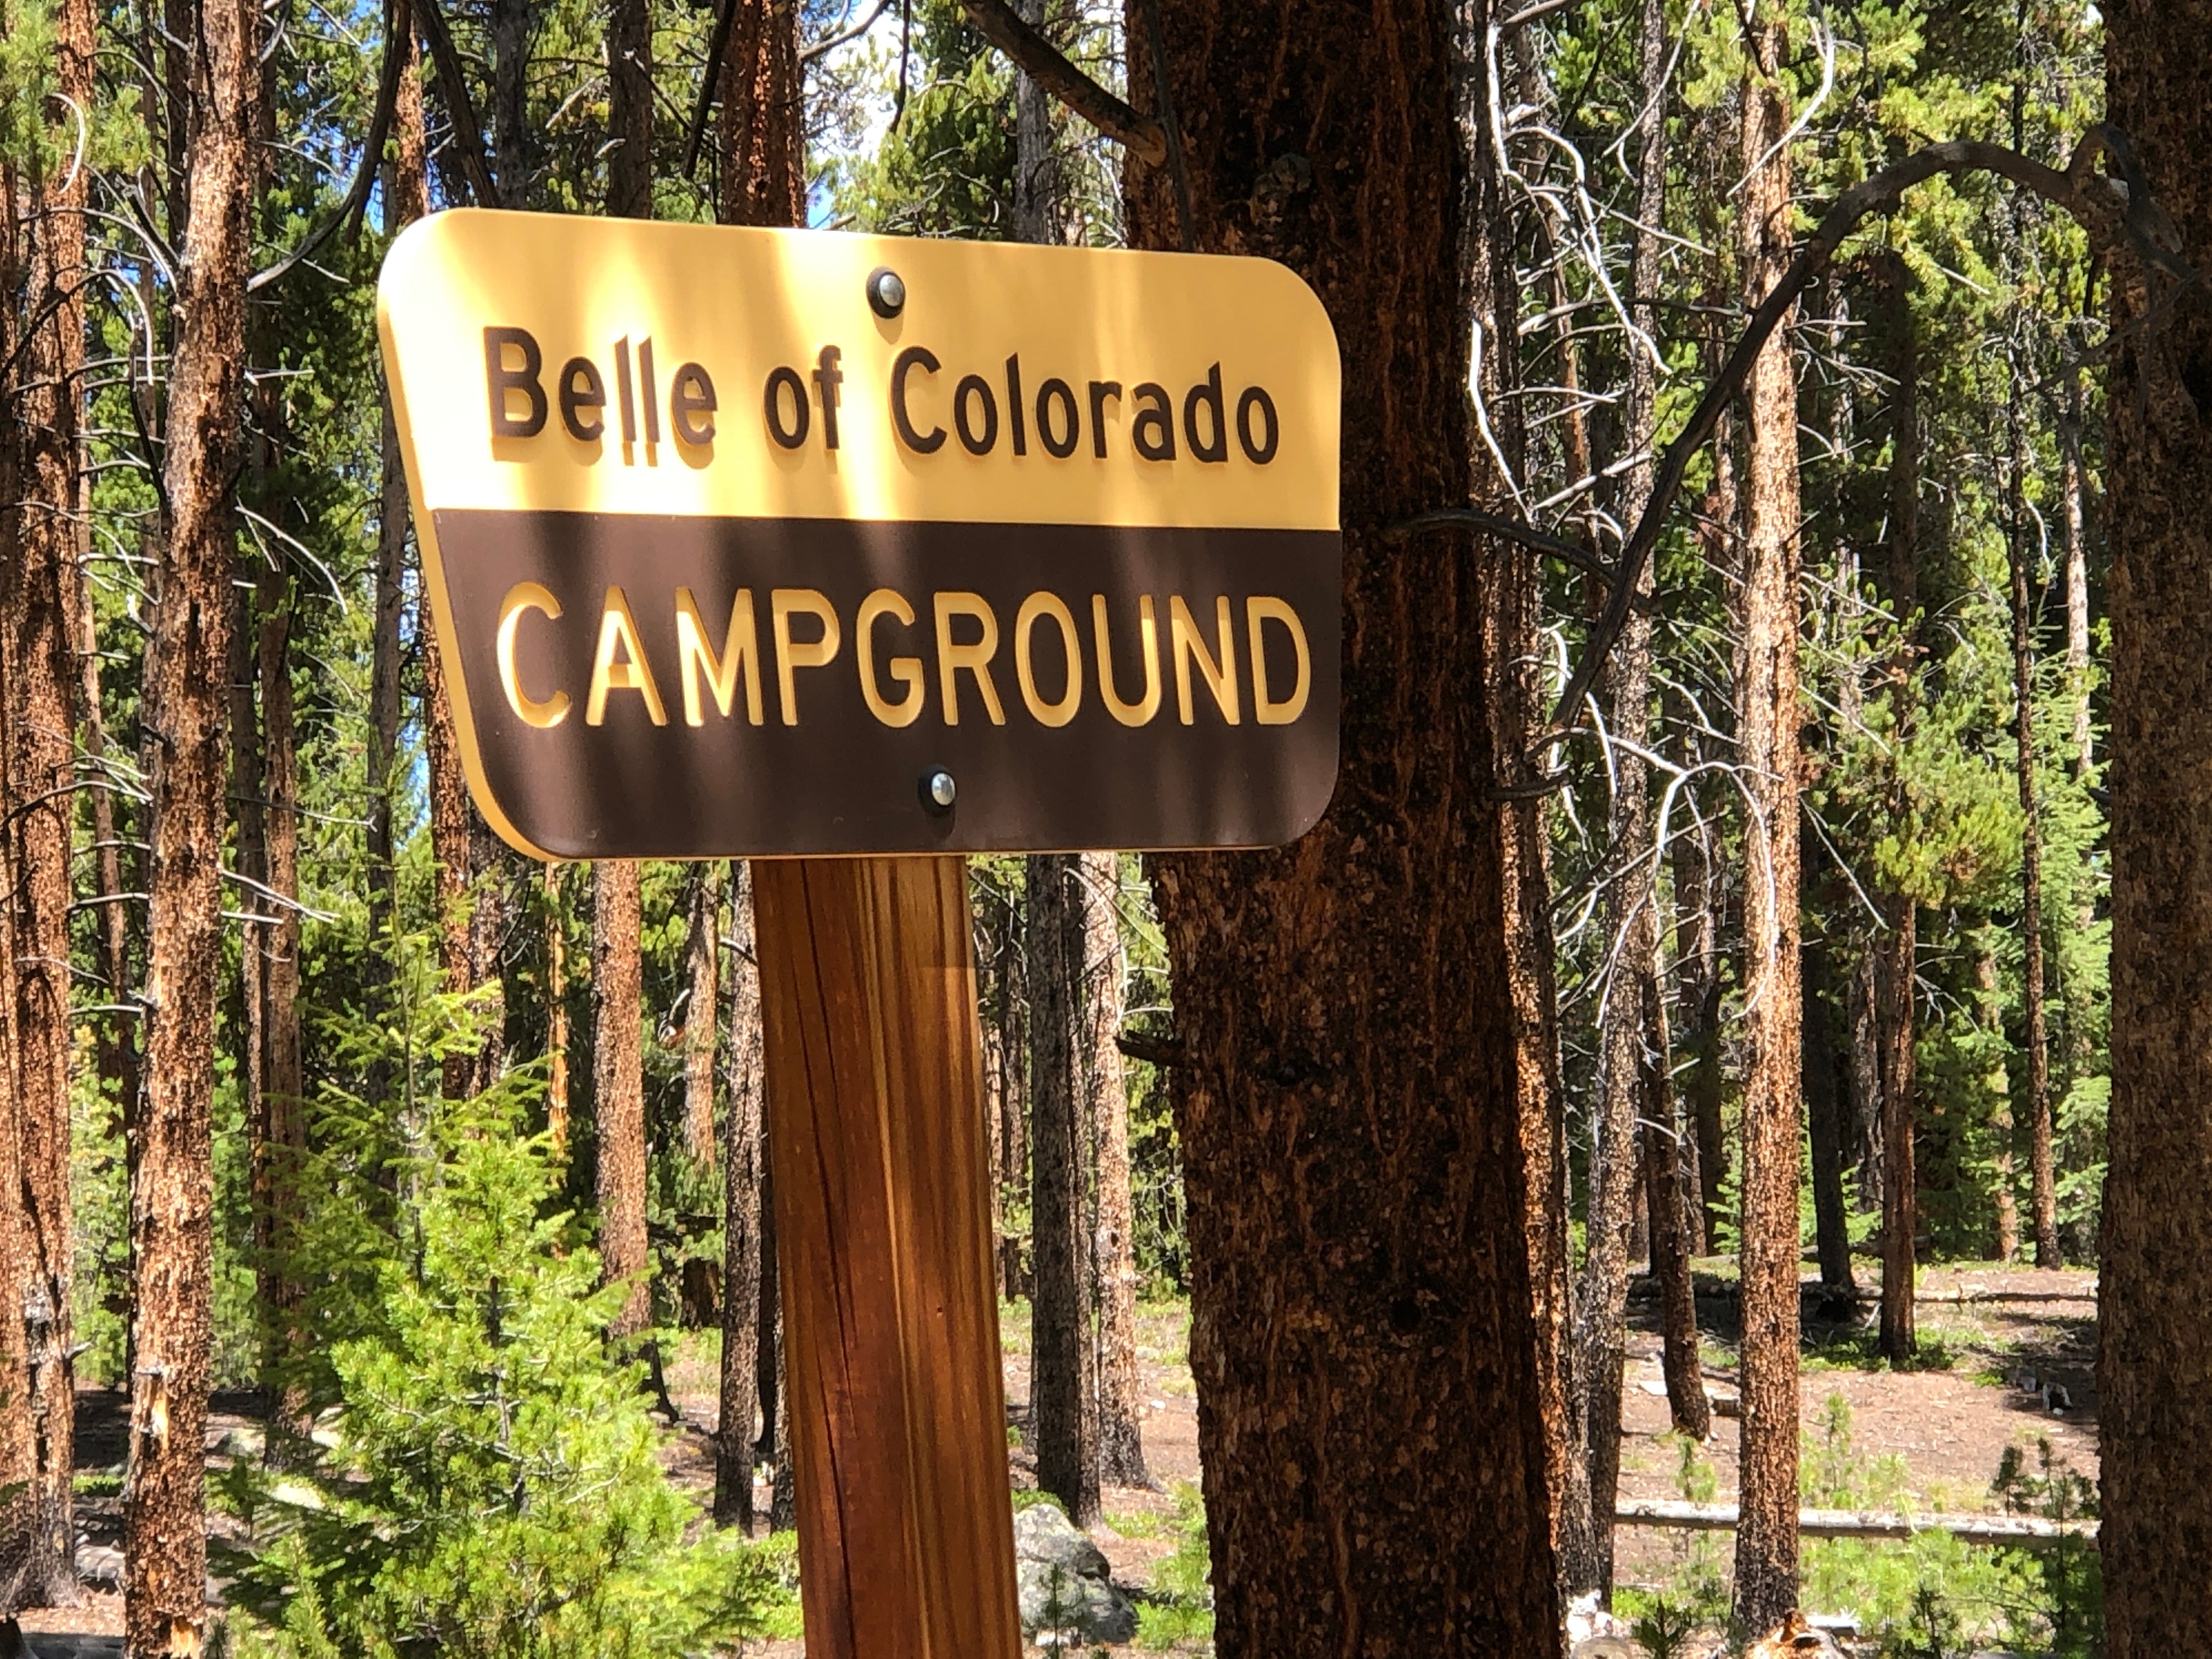 Camper submitted image from Belle of Colorado Campground - 1